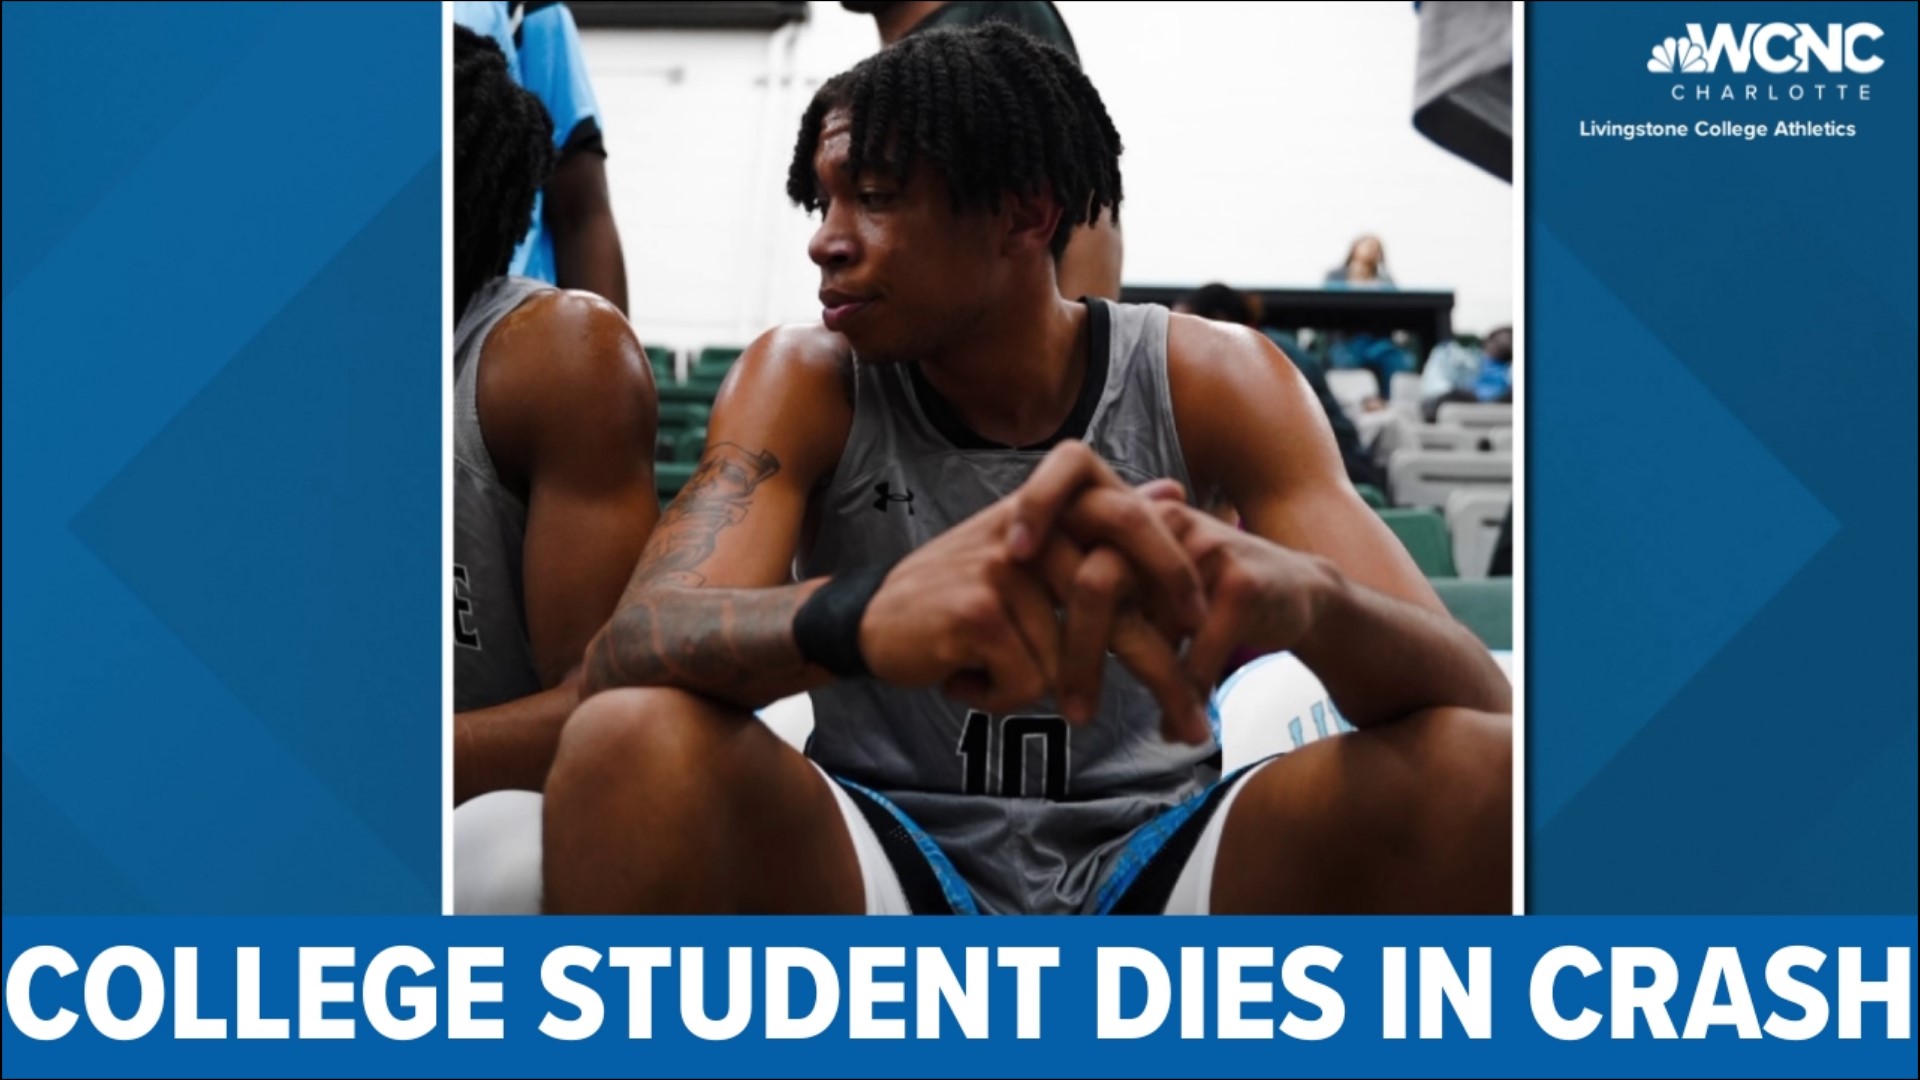 A Rowan County college is mourning the loss of a basketball player who died in a car crash on Monday.